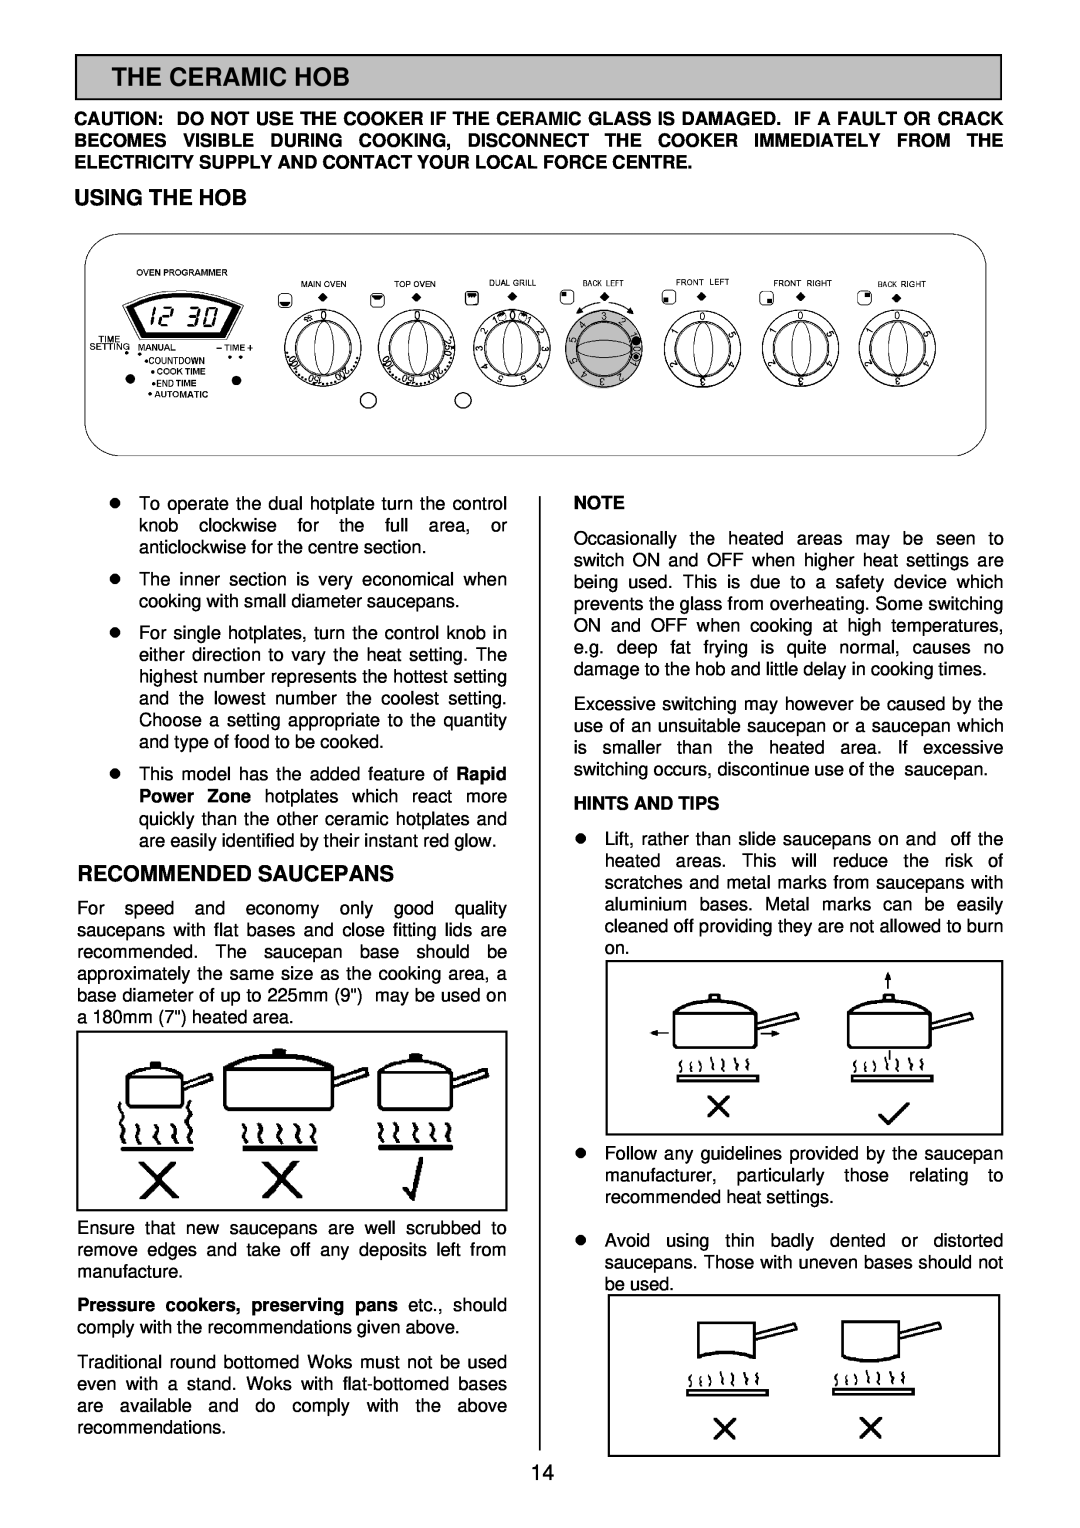 Tricity Bendix SIE 532 installation instructions The Ceramic Hob, Using The Hob, Recommended Saucepans, lHINTS AND TIPS 